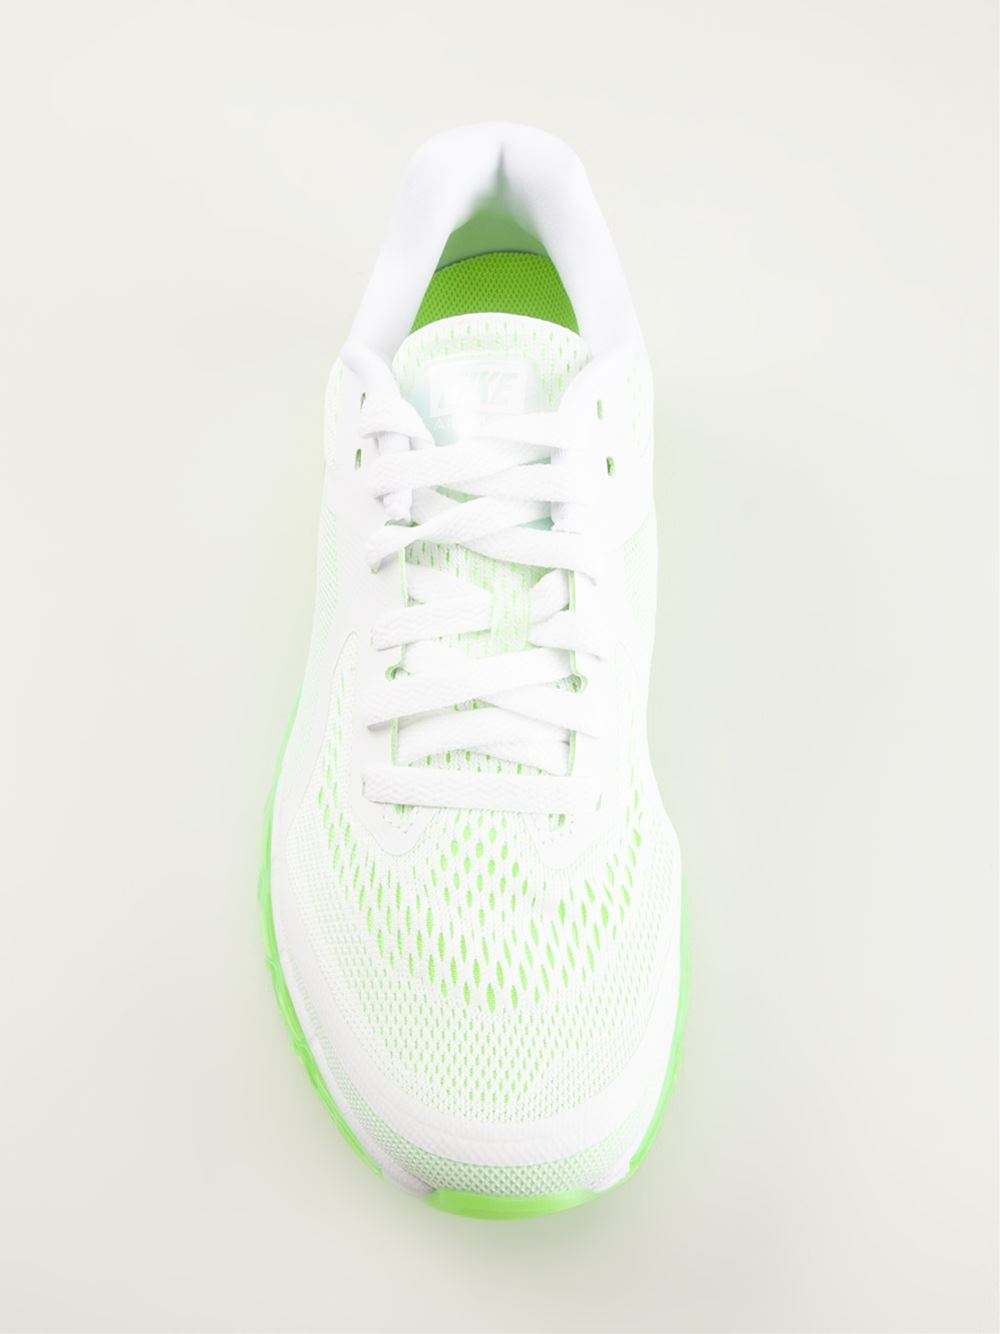 white and neon nike shoes